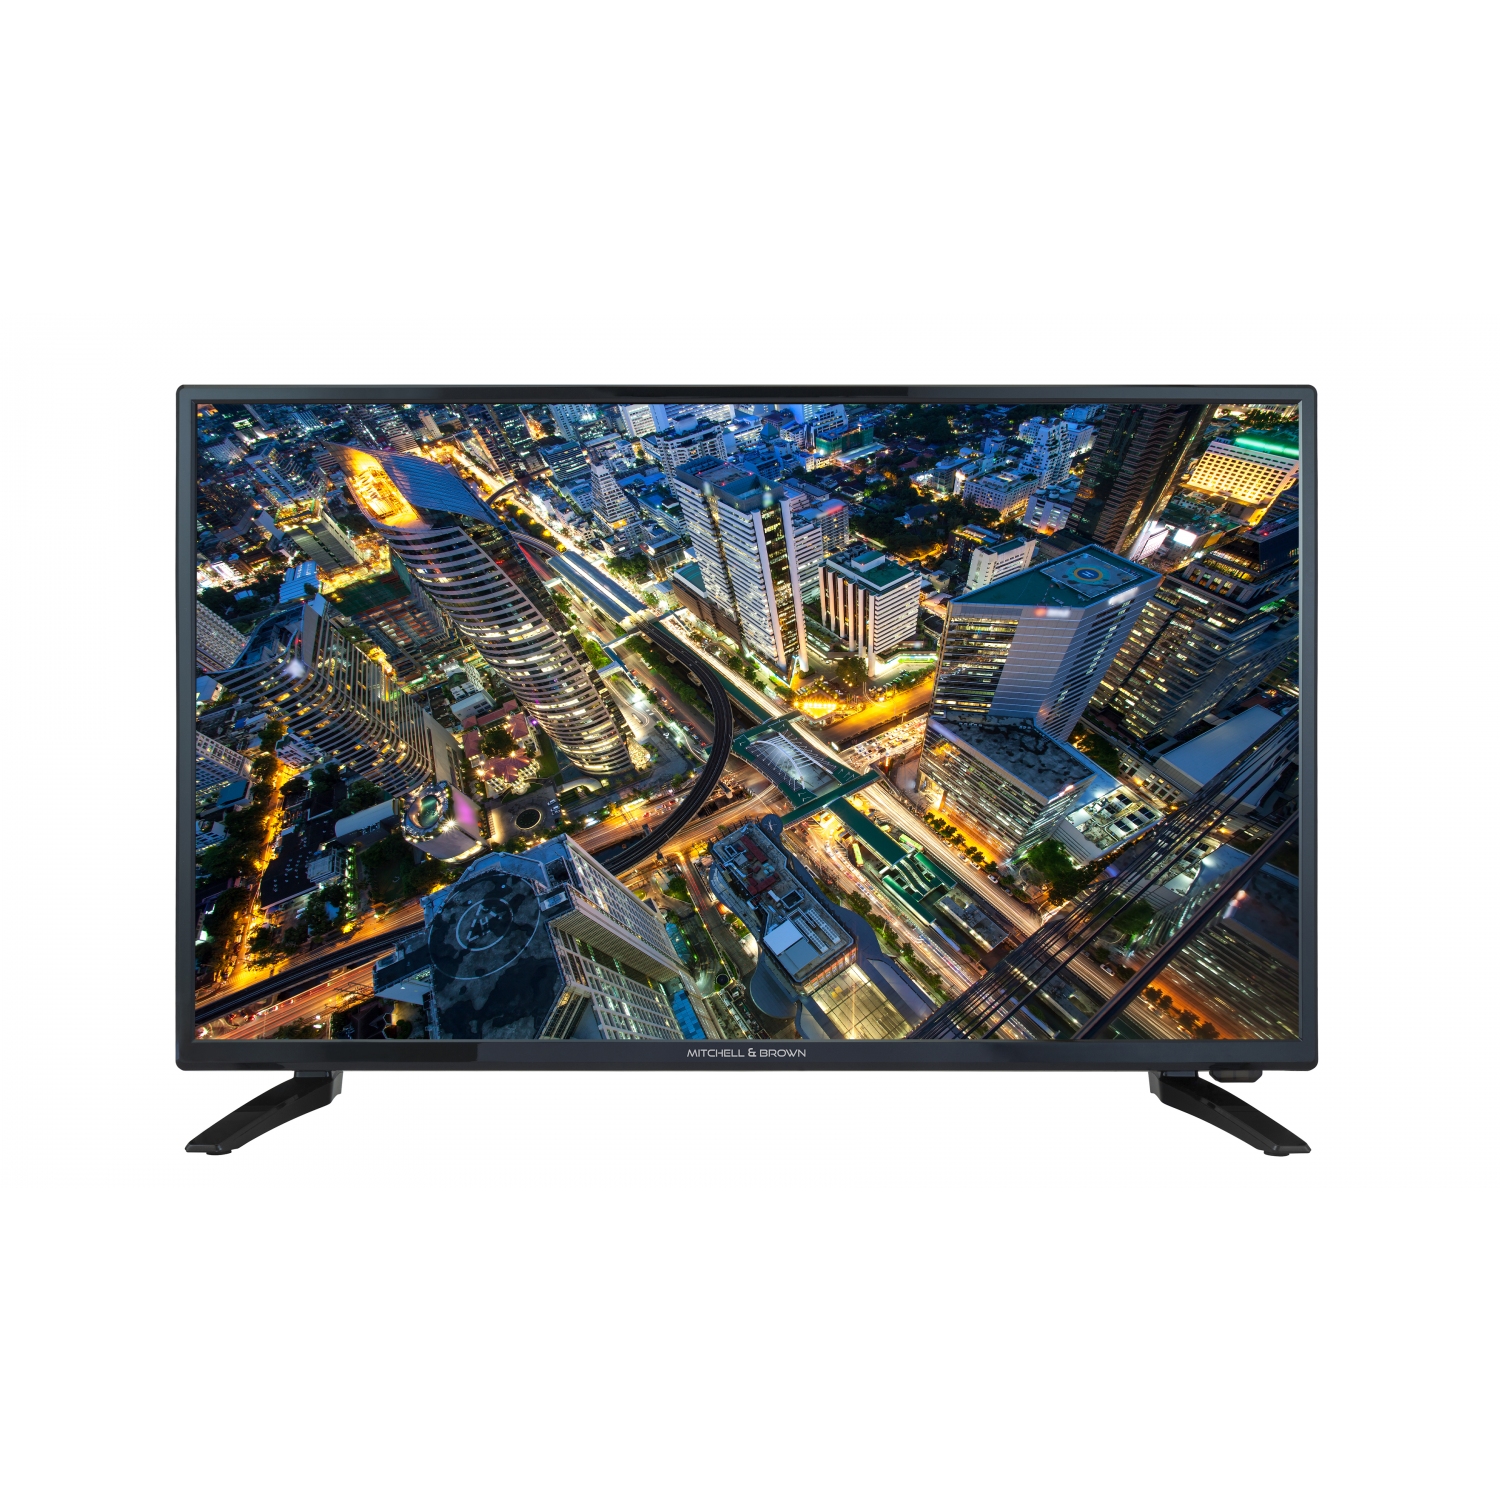 Mitchell & Brown 28" HD Ready LED TV - 0